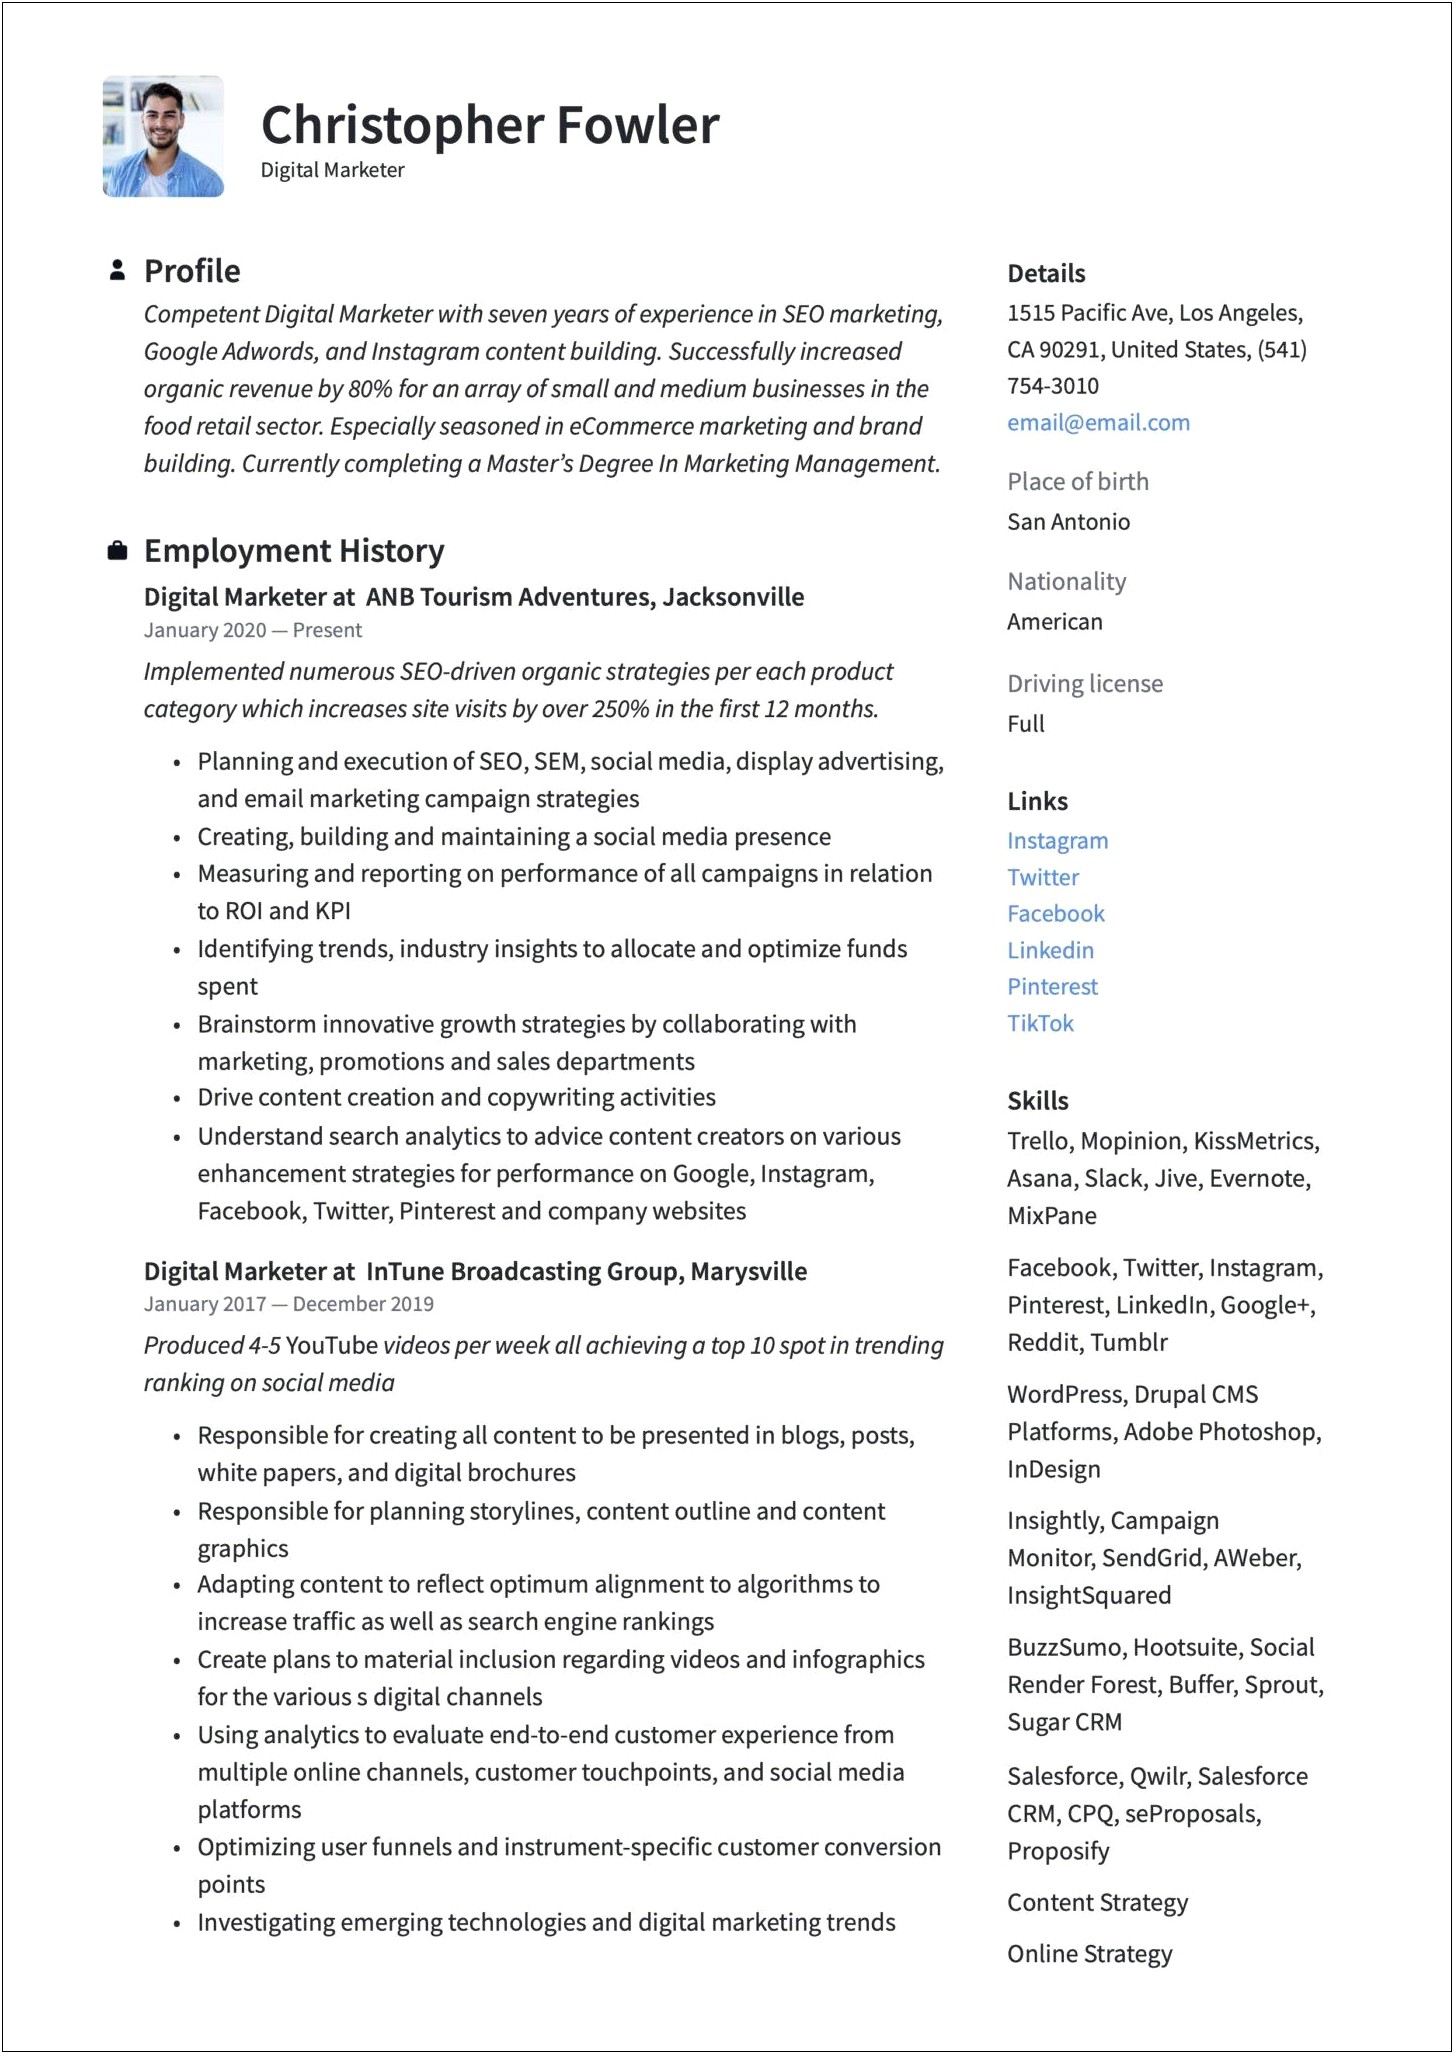 Resume Example With Blurb At Top